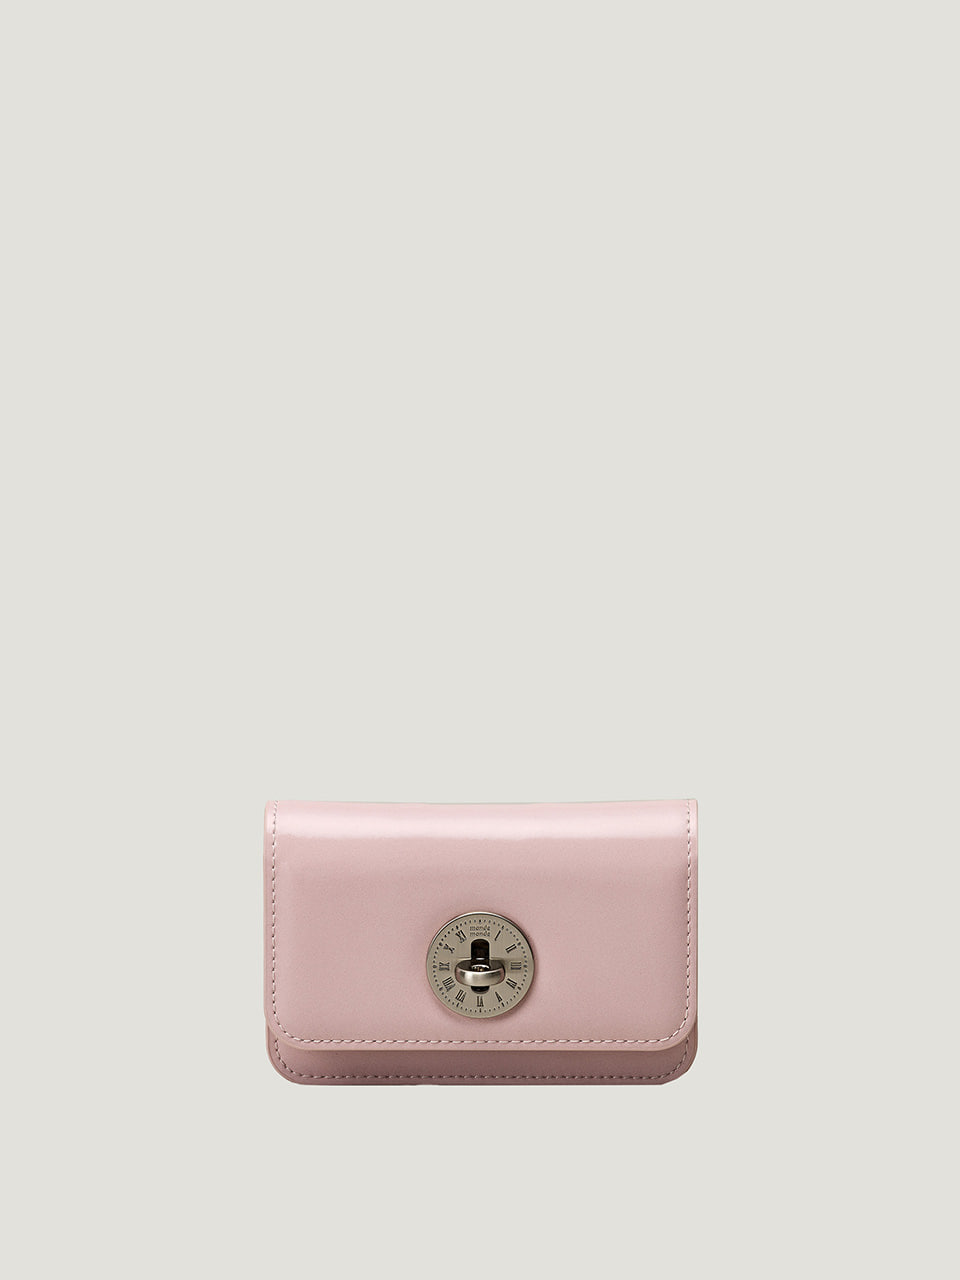 monde wallet french pink